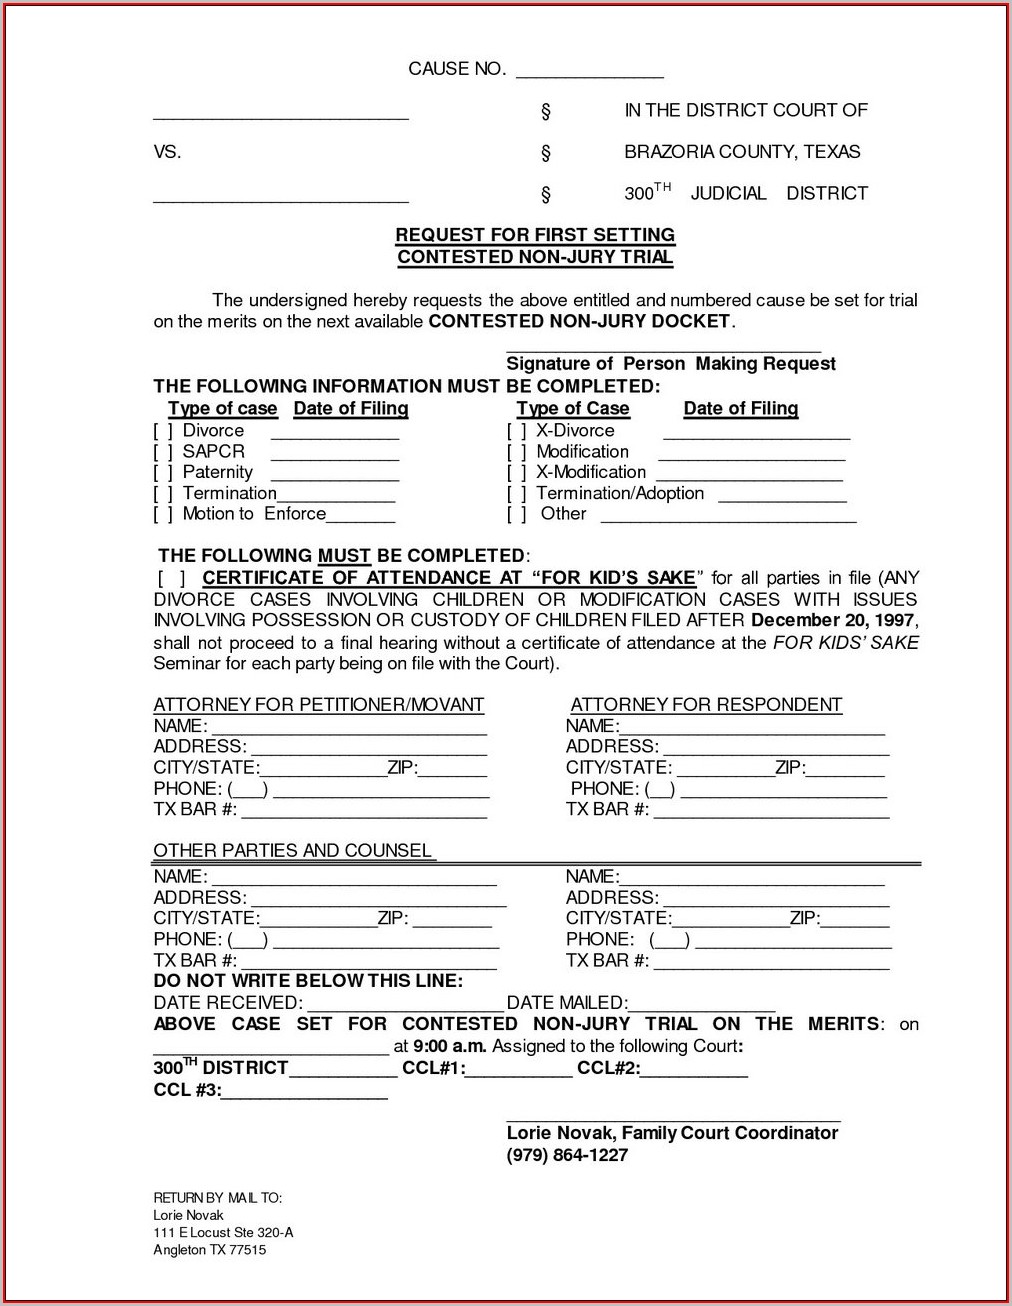 texas-divorce-forms-with-child-template-1-resume-examples-opklazo3xn